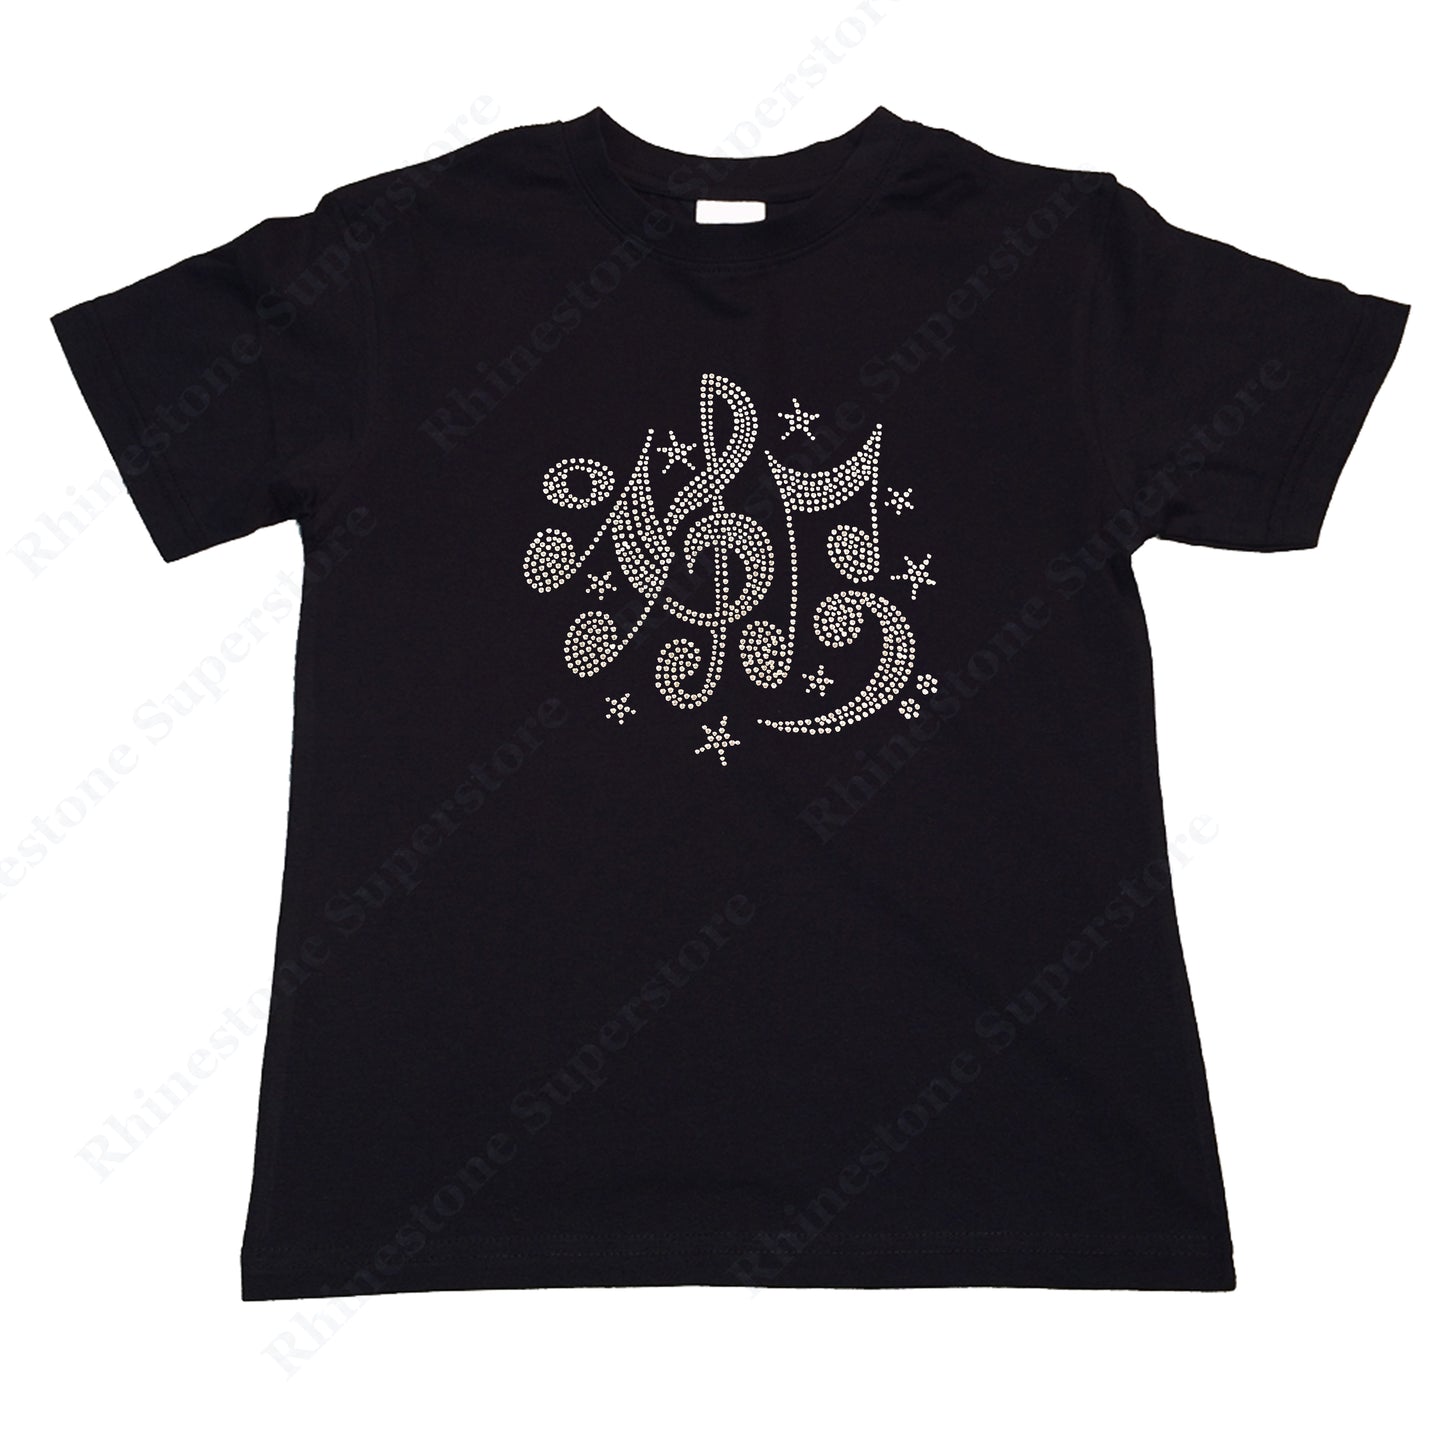 Girls Rhinestone T-Shirt " Music Notes and Stars " Kids Size 3 to 14 Available